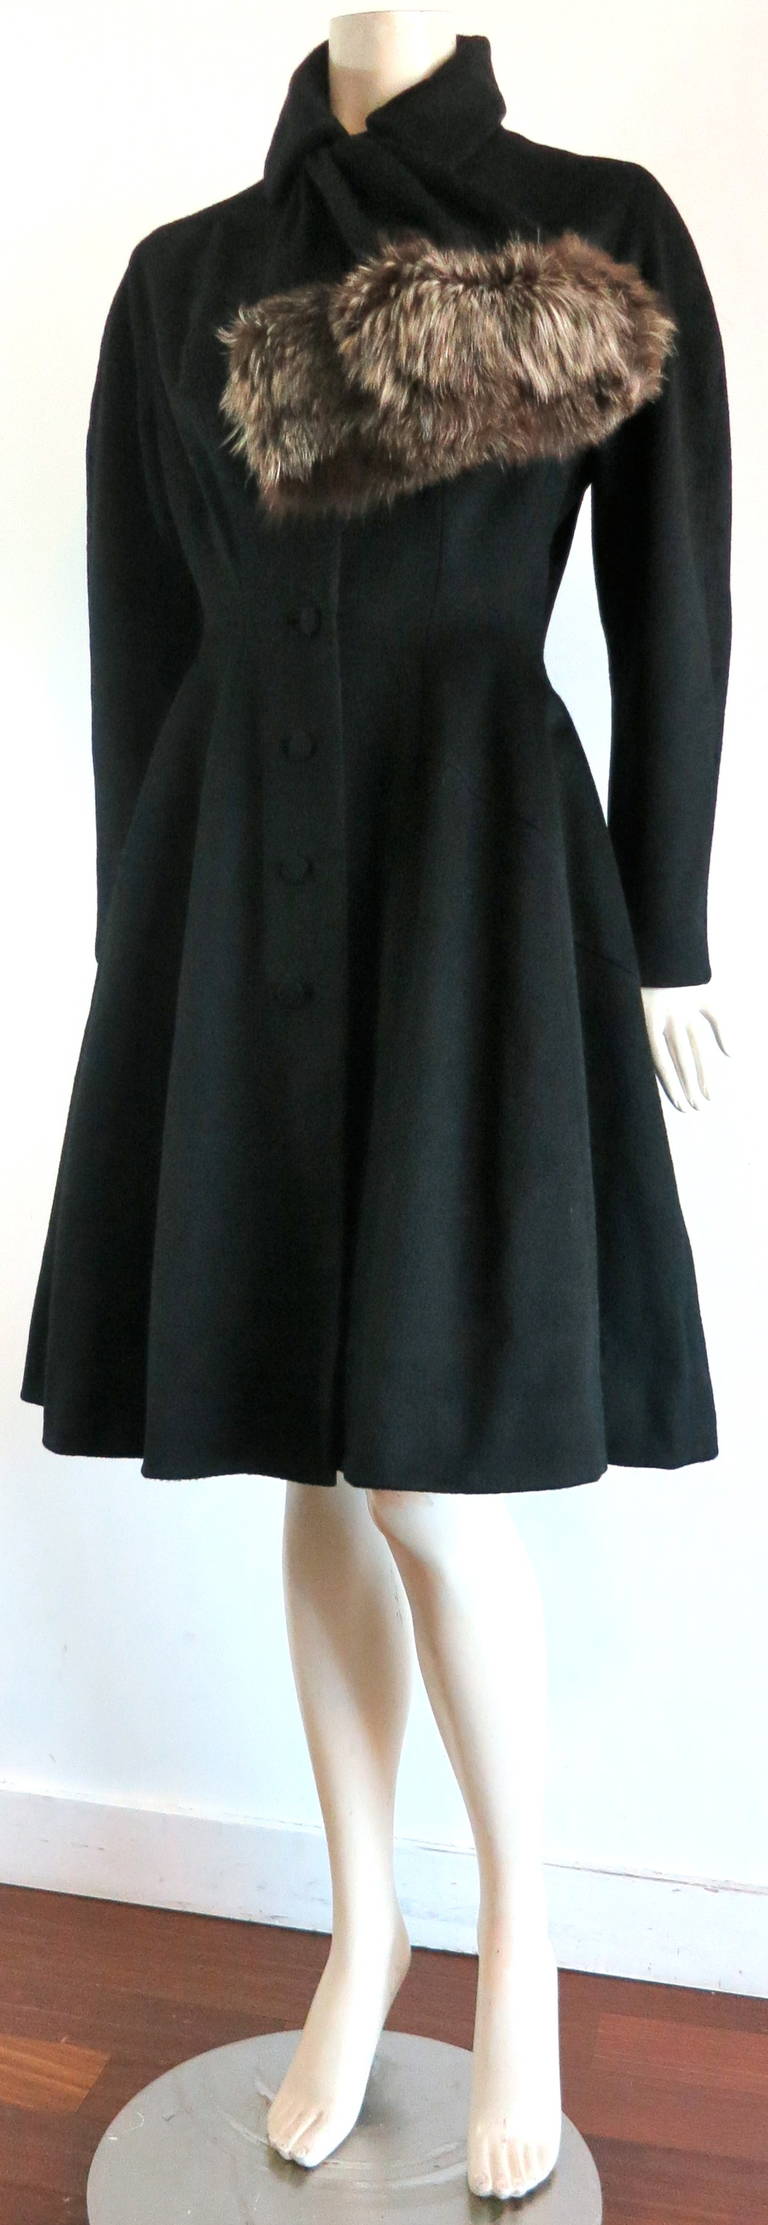 1950's LILLI ANN Black wool coat with fox fur trim.

This adorable coat was designed by Adolph Schuman during the late 1950's to early 1960's.

Made of thick, french, black wool fabrication with genuine, silver-tipped fox fur trim at front scarf